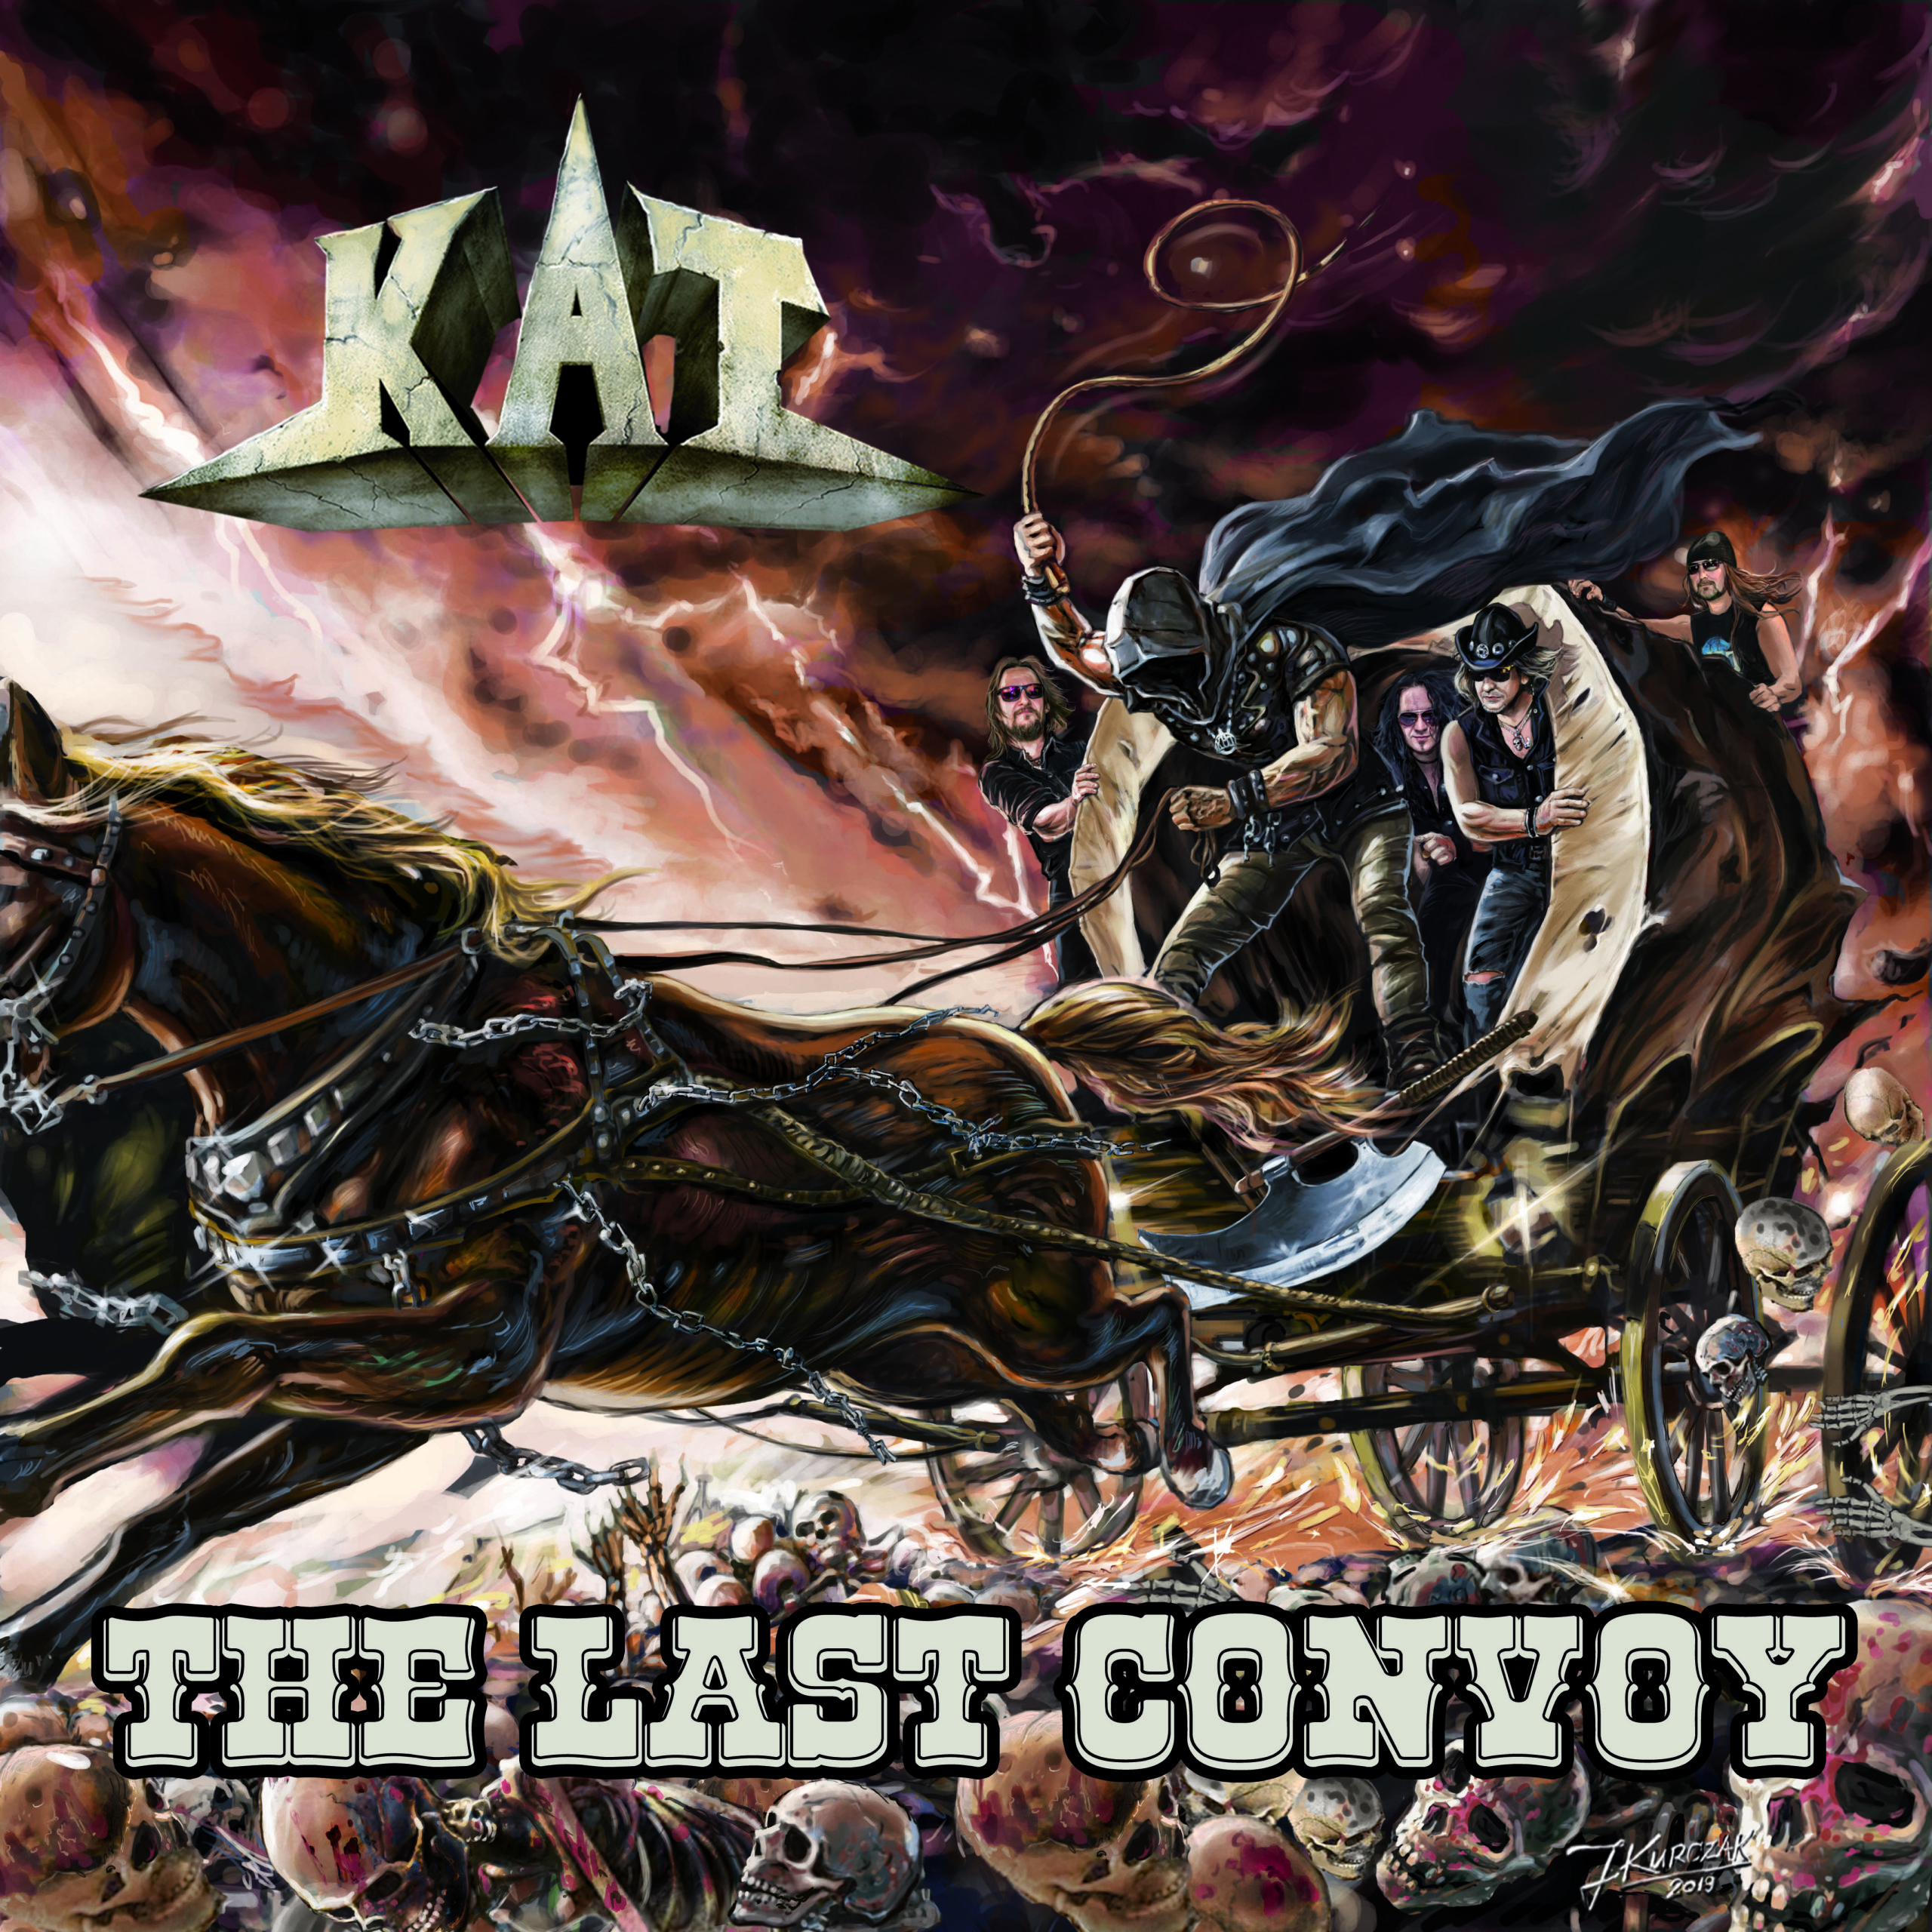 Reseña – review: Kat “The Last Convoy”